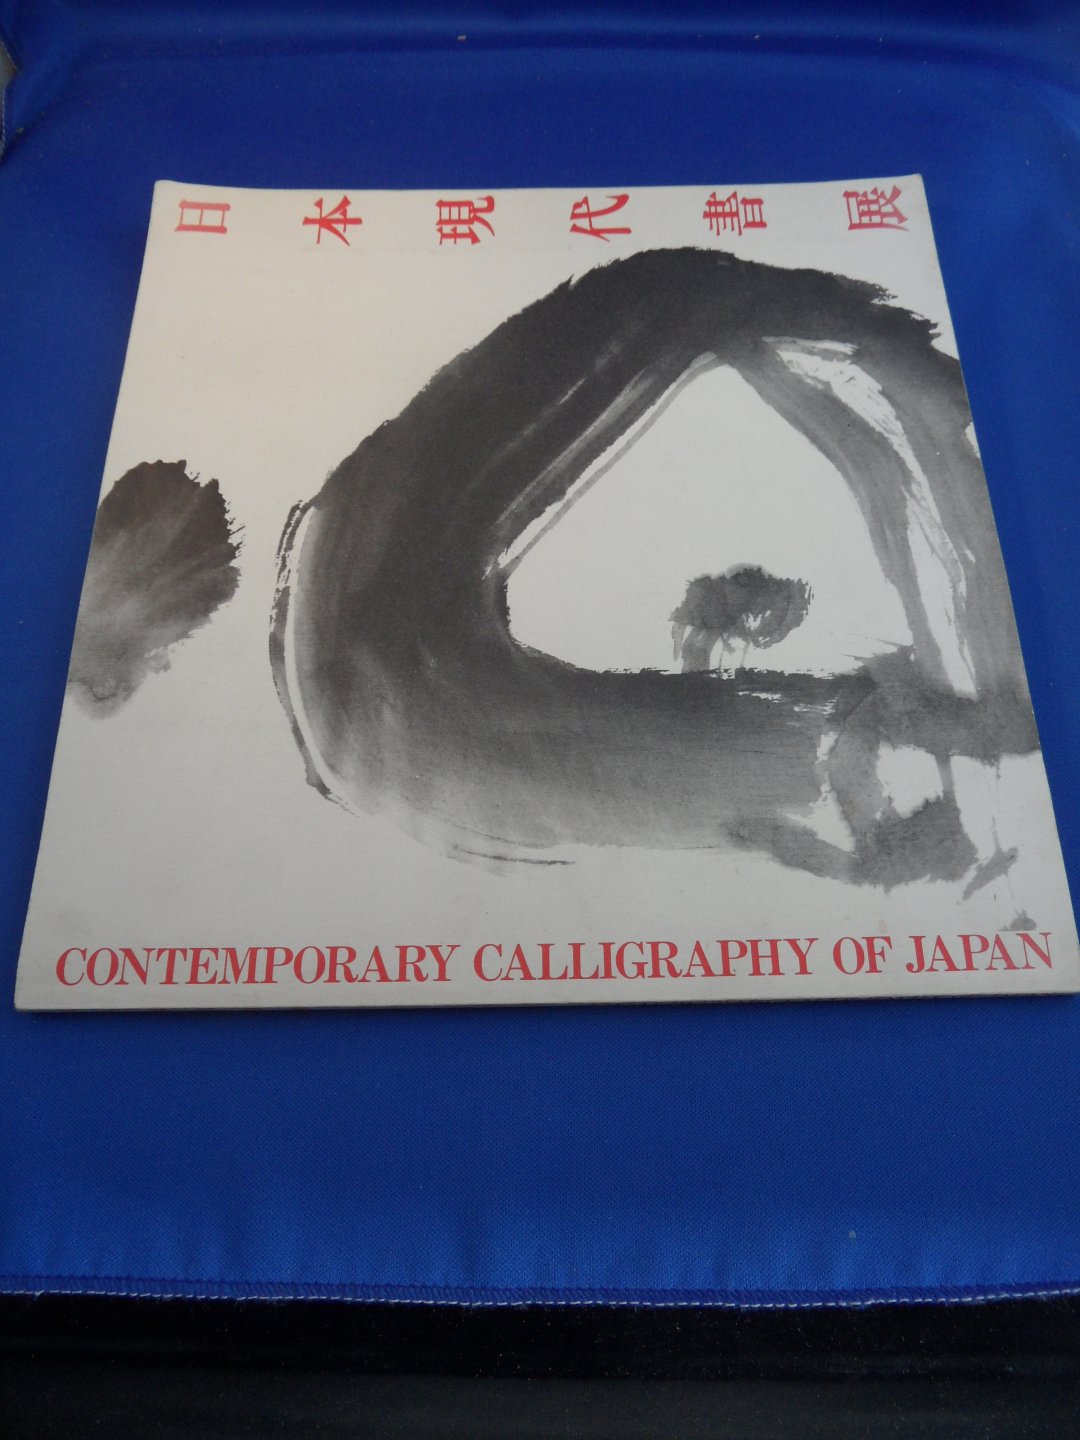  - 10th exihibition of contemporary calligraphy of Japan